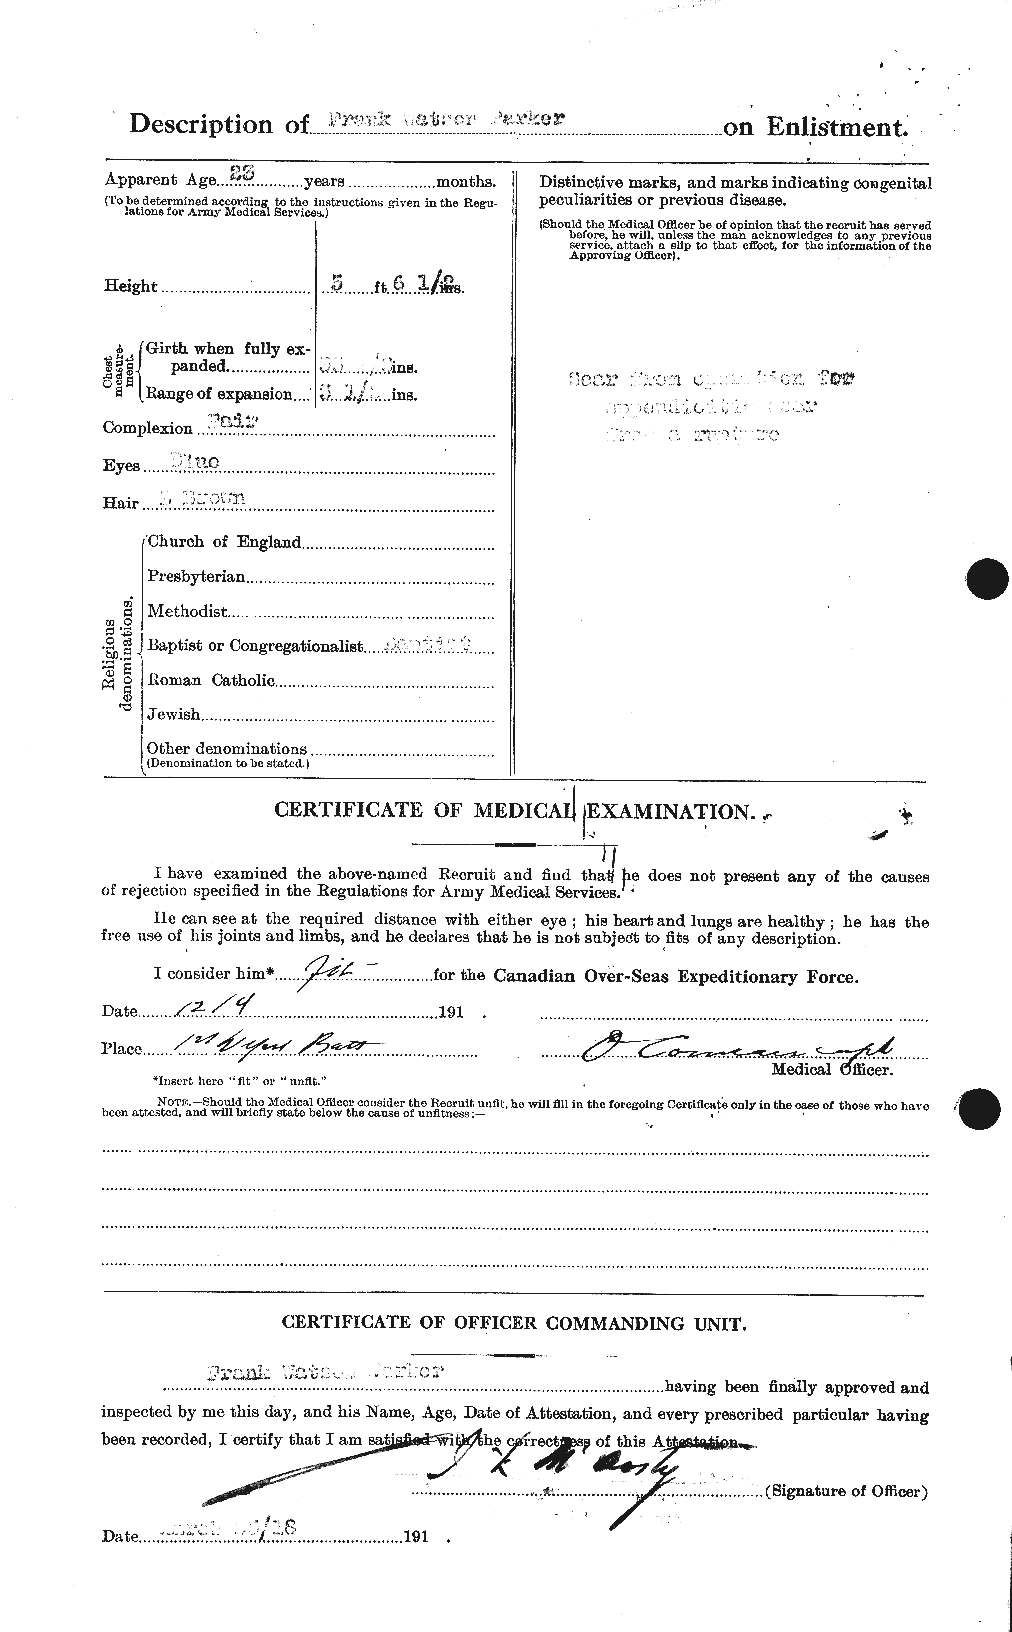 Personnel Records of the First World War - CEF 565197b